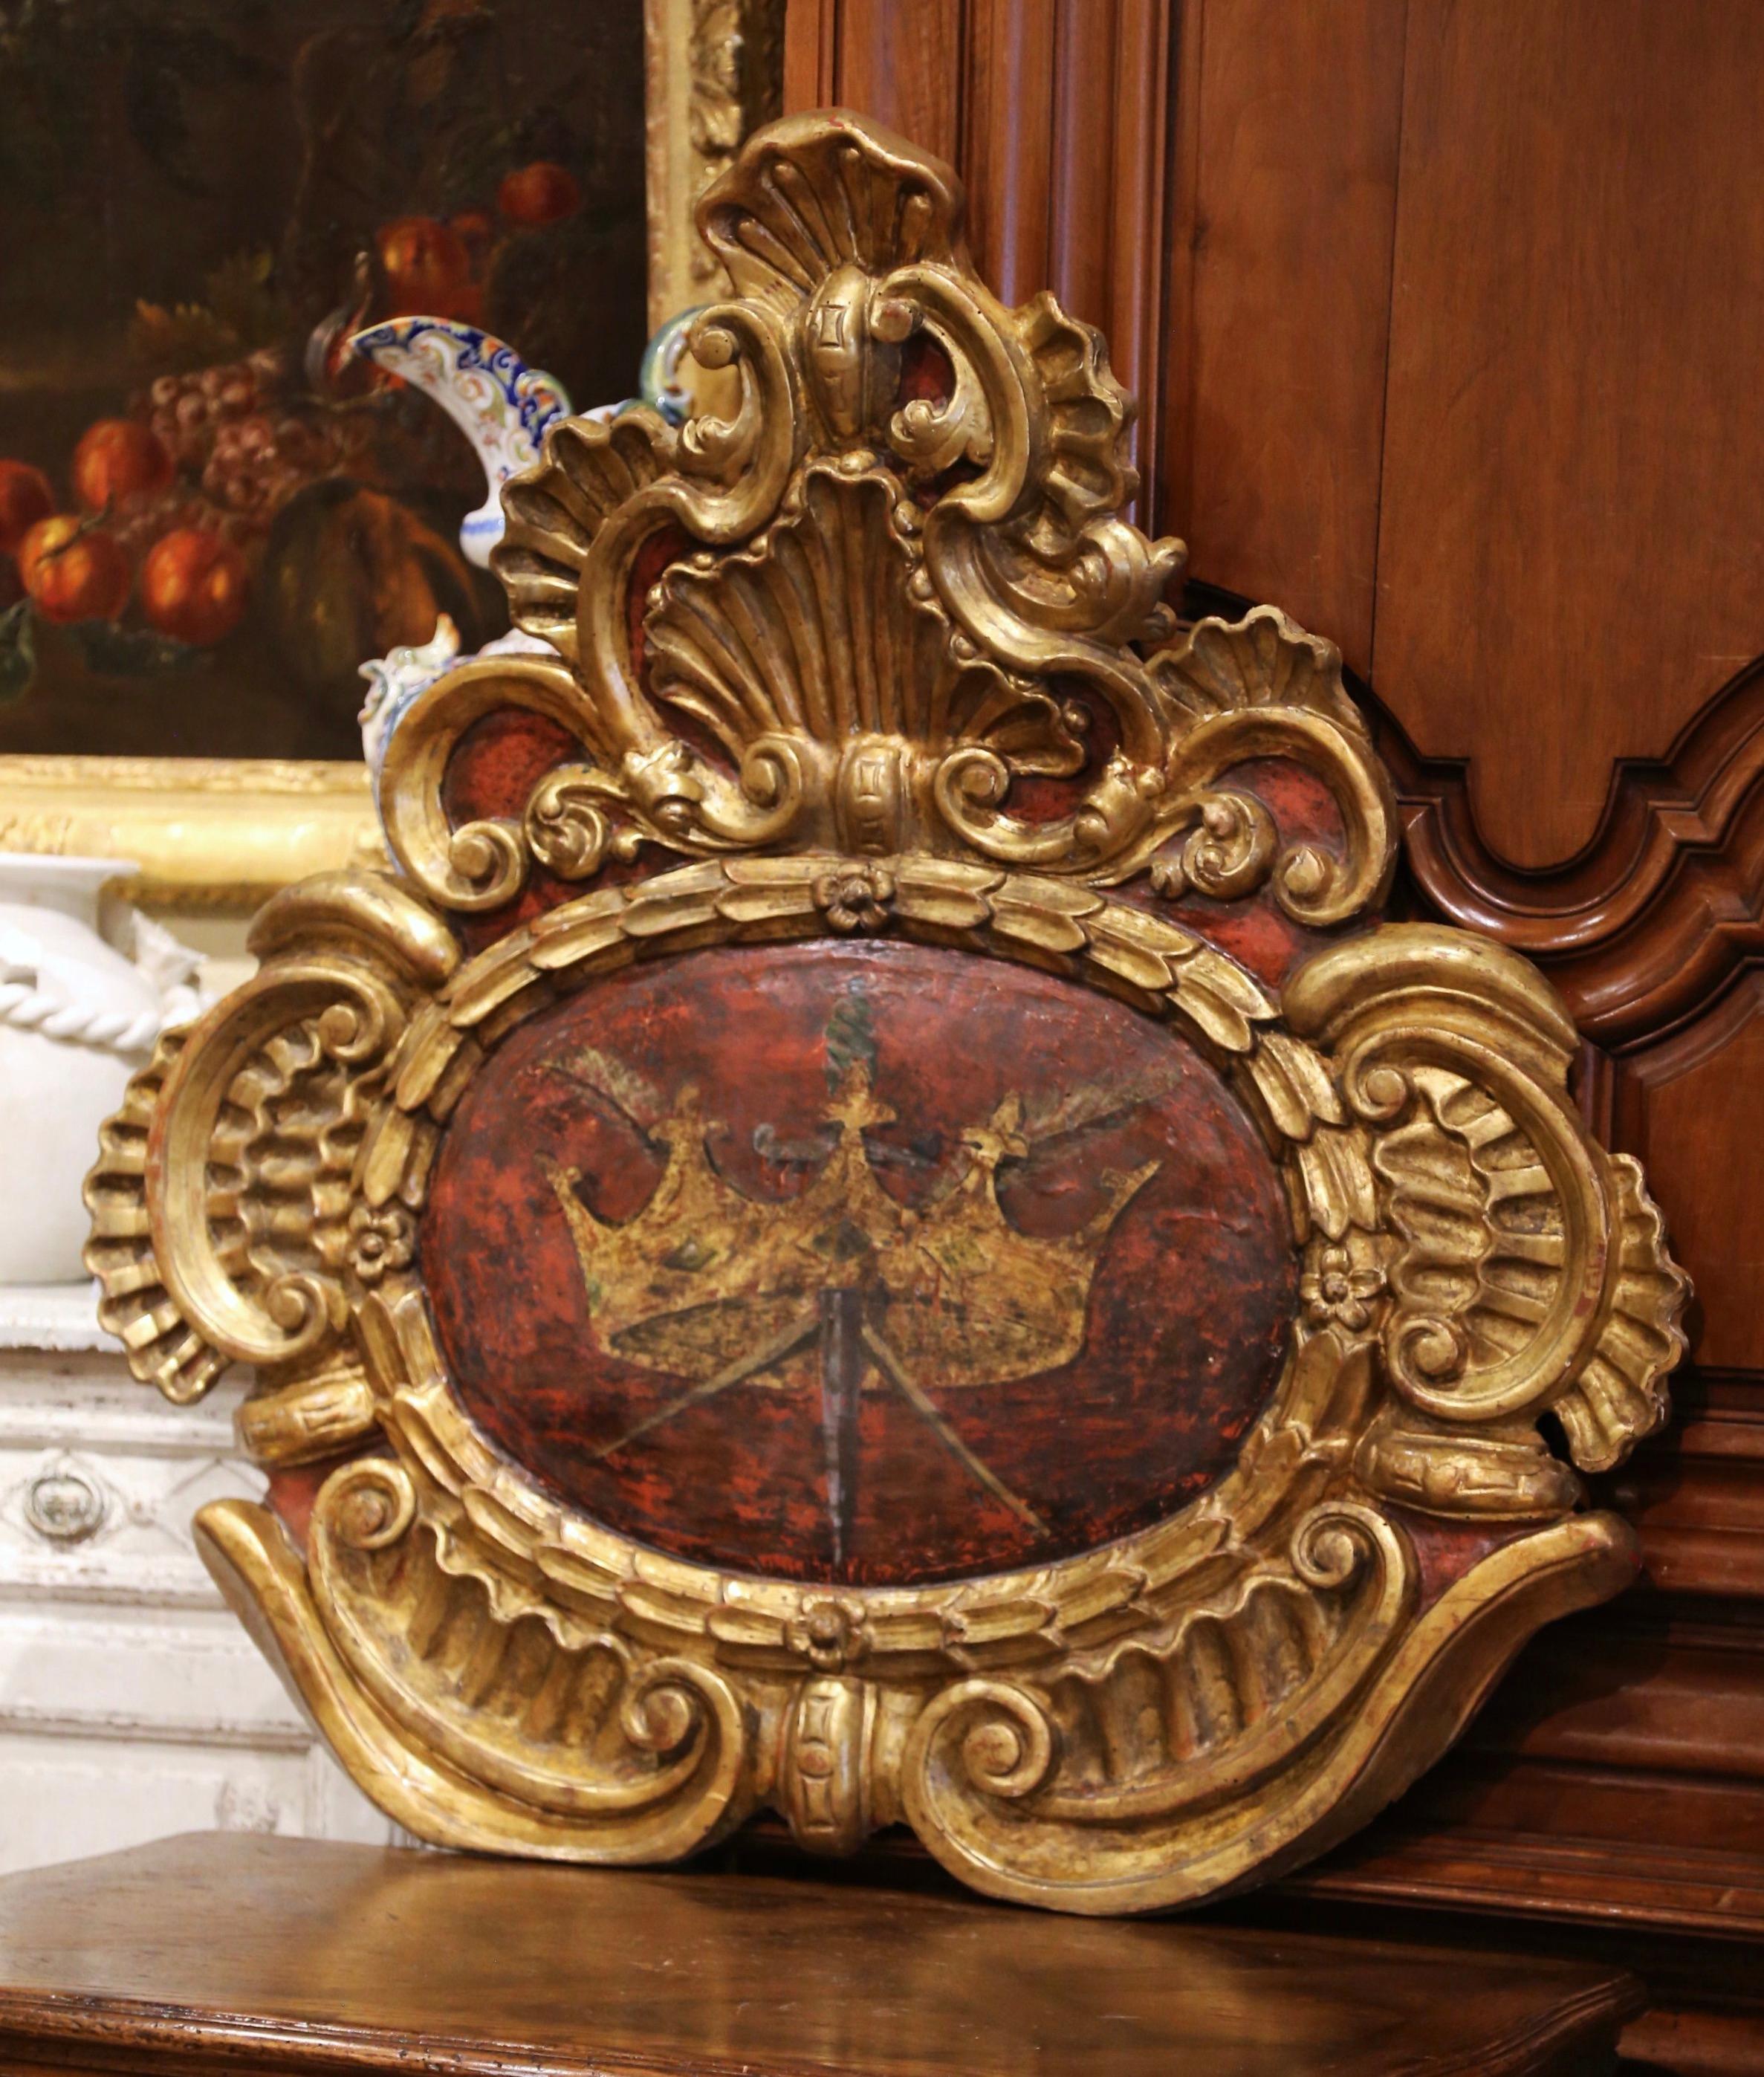 Embellish a mantel or decorate a man's office with this important antique wood carved sculpture. Crafted in France, circa 1780, the elegant wall-mounted plaque features exquisite carved scrolled including a large shell motif at the pediment. The